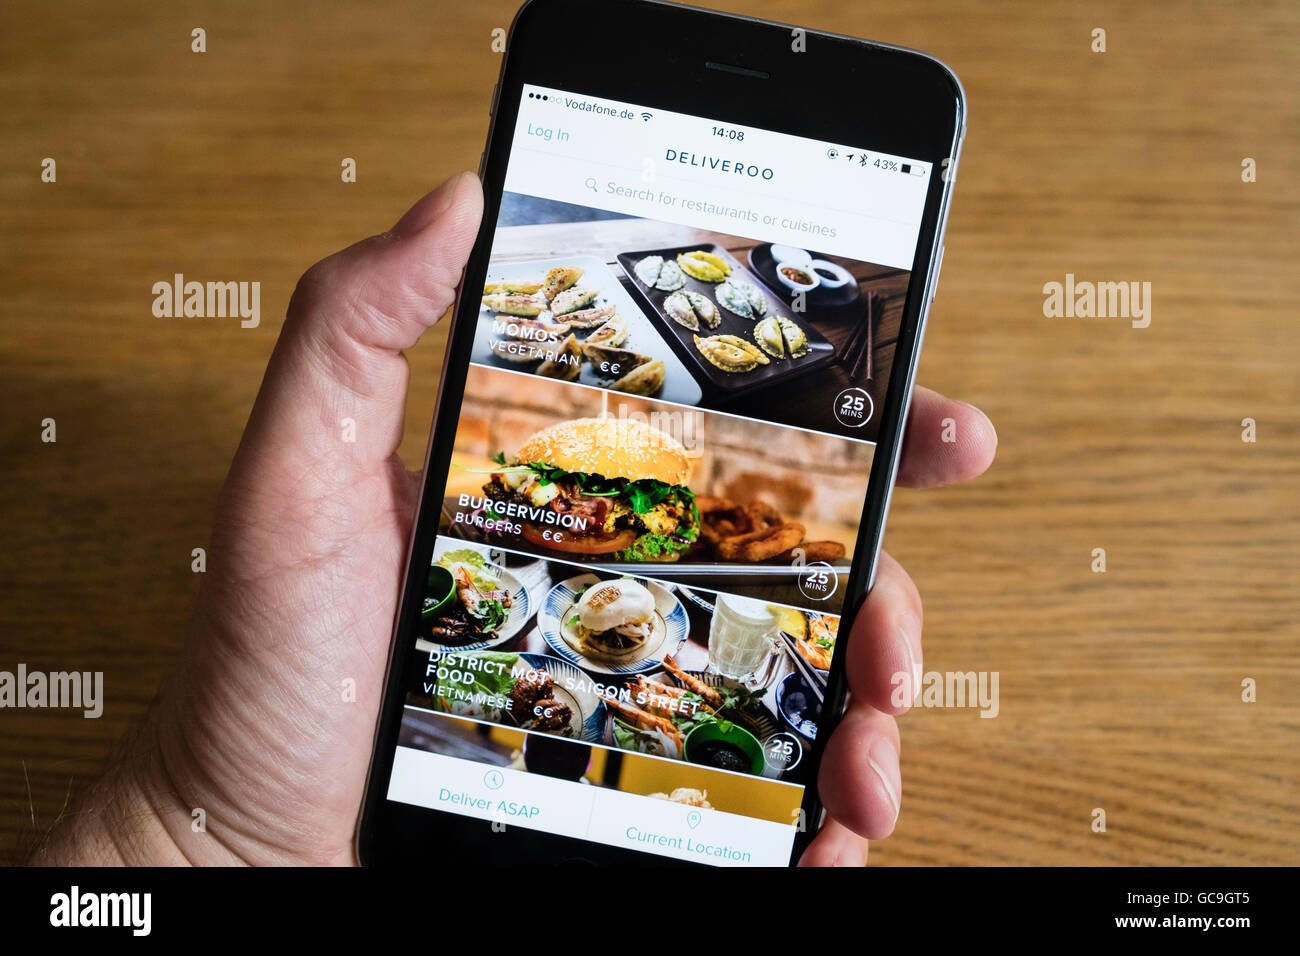 Deiveroo app restaurant food delivery service on an iPhone 6 smart phone Stock Photo